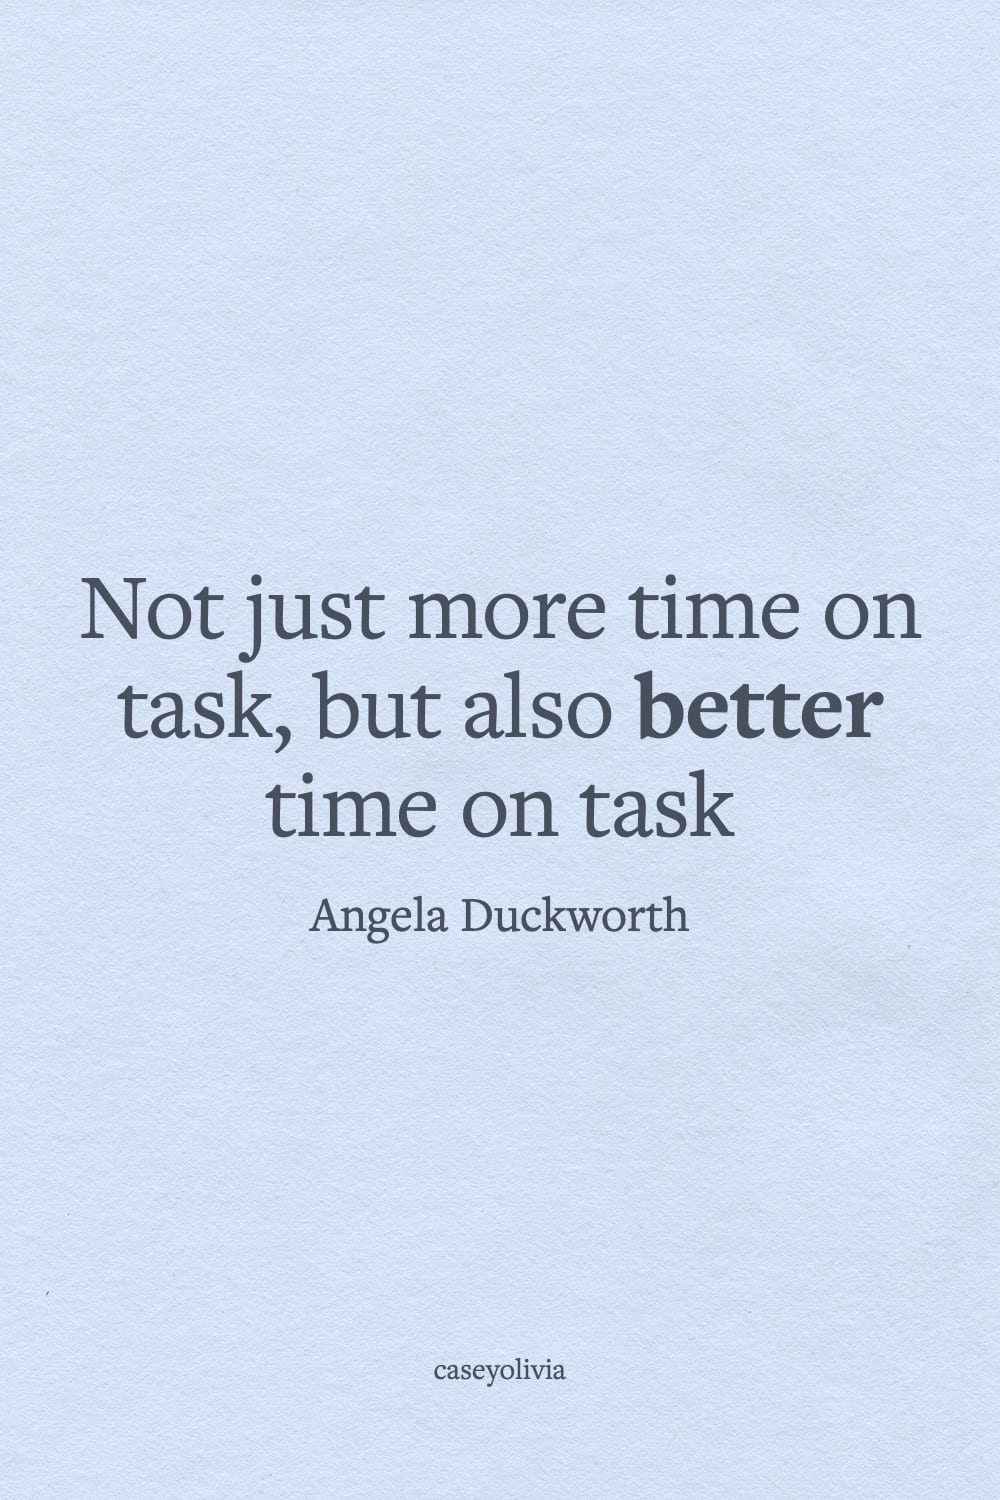 angela duckworth better time on task quote about work